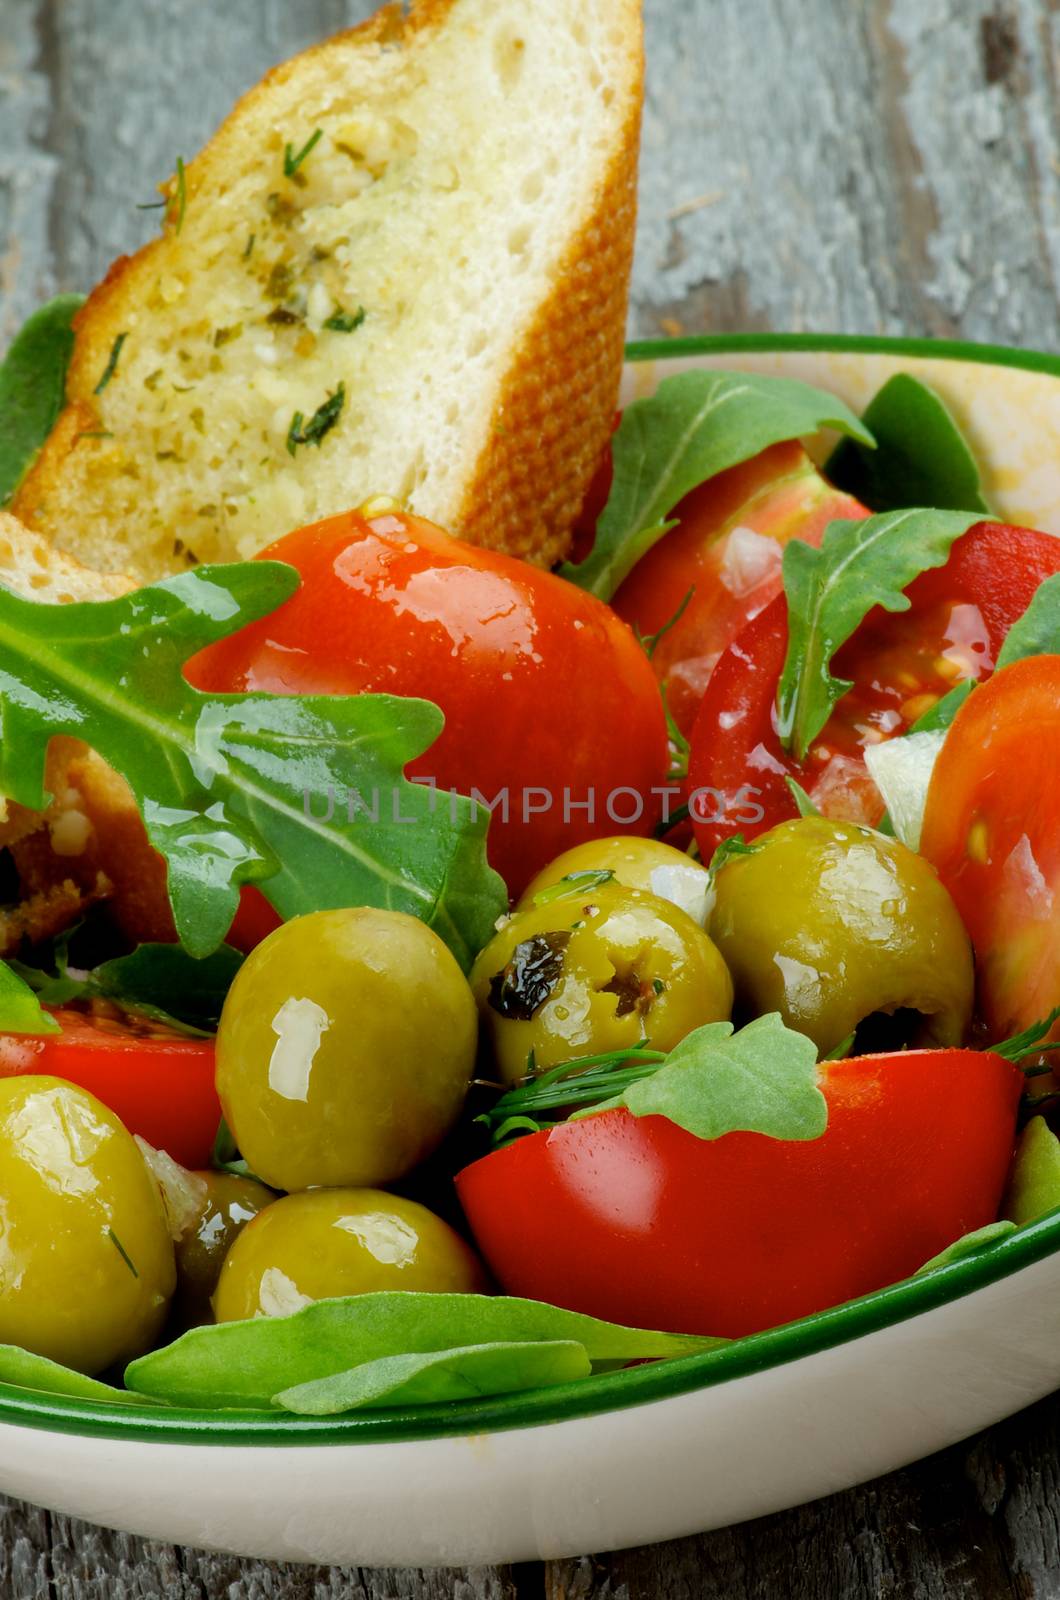 Fresh Tasty Tomatoes Salad with Arugula, Olives and Greens with Garlic Bread in Bowl closeup on Rustic Wooden background